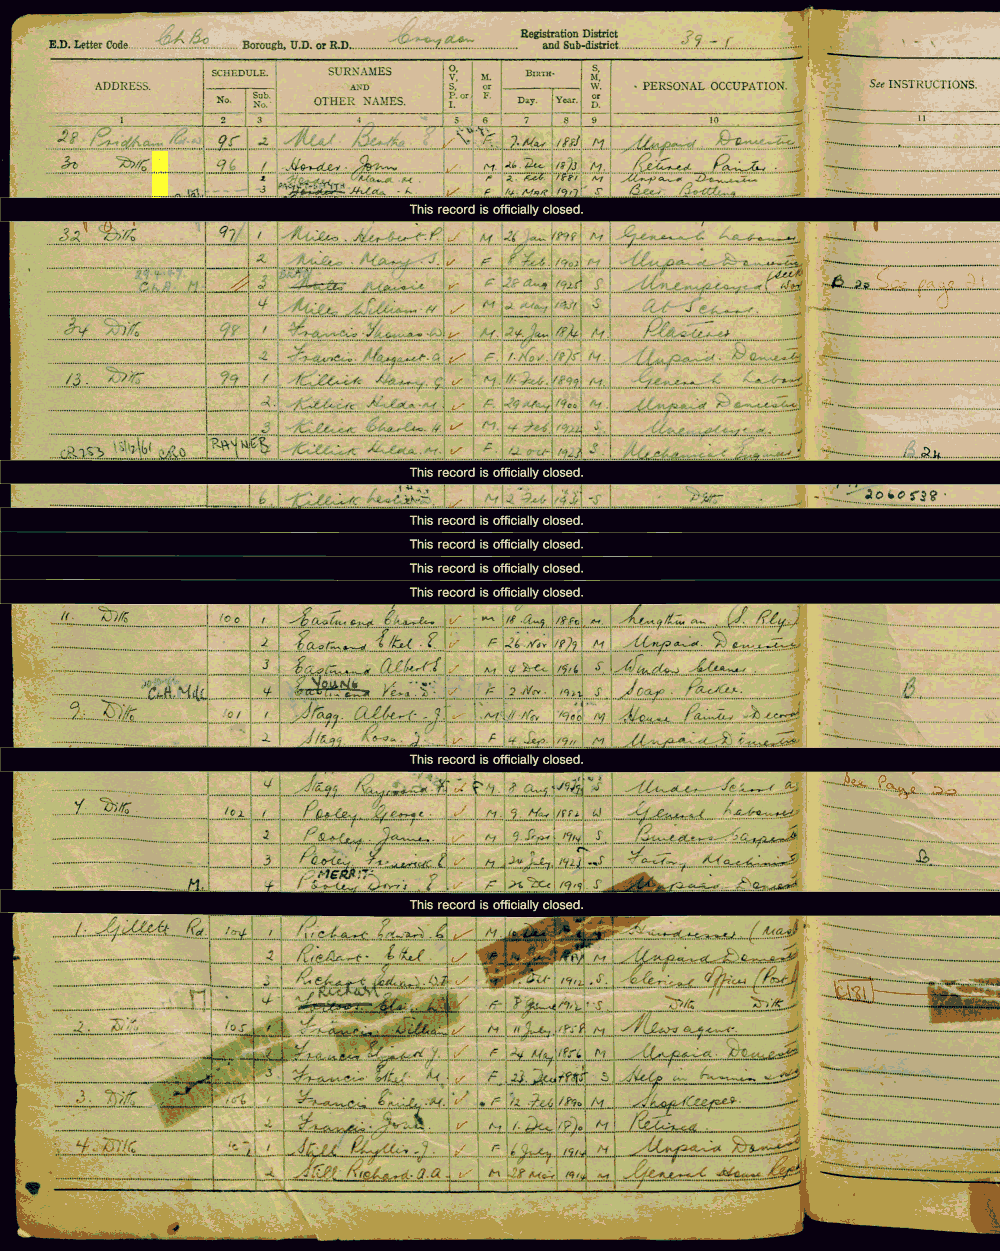 1939 census returns for John and Maud Horder and Hilda Horder